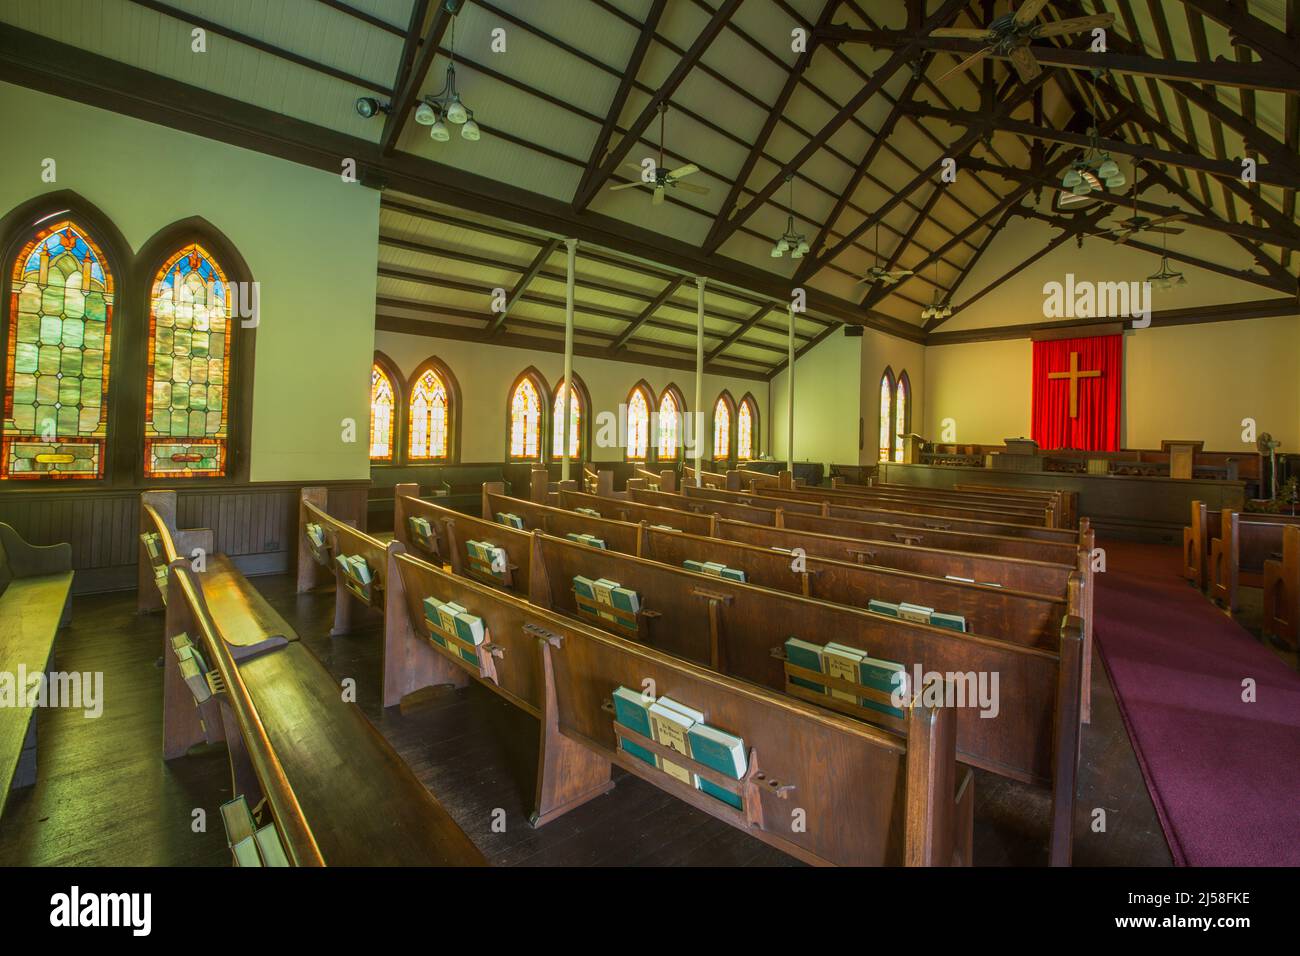 The interior of the historic Wai'oli Hui'ia Church in Hanalei, Kauai, Hawaii, built in 1912 to replace an earlier building and is the oldest church bu Stock Photo